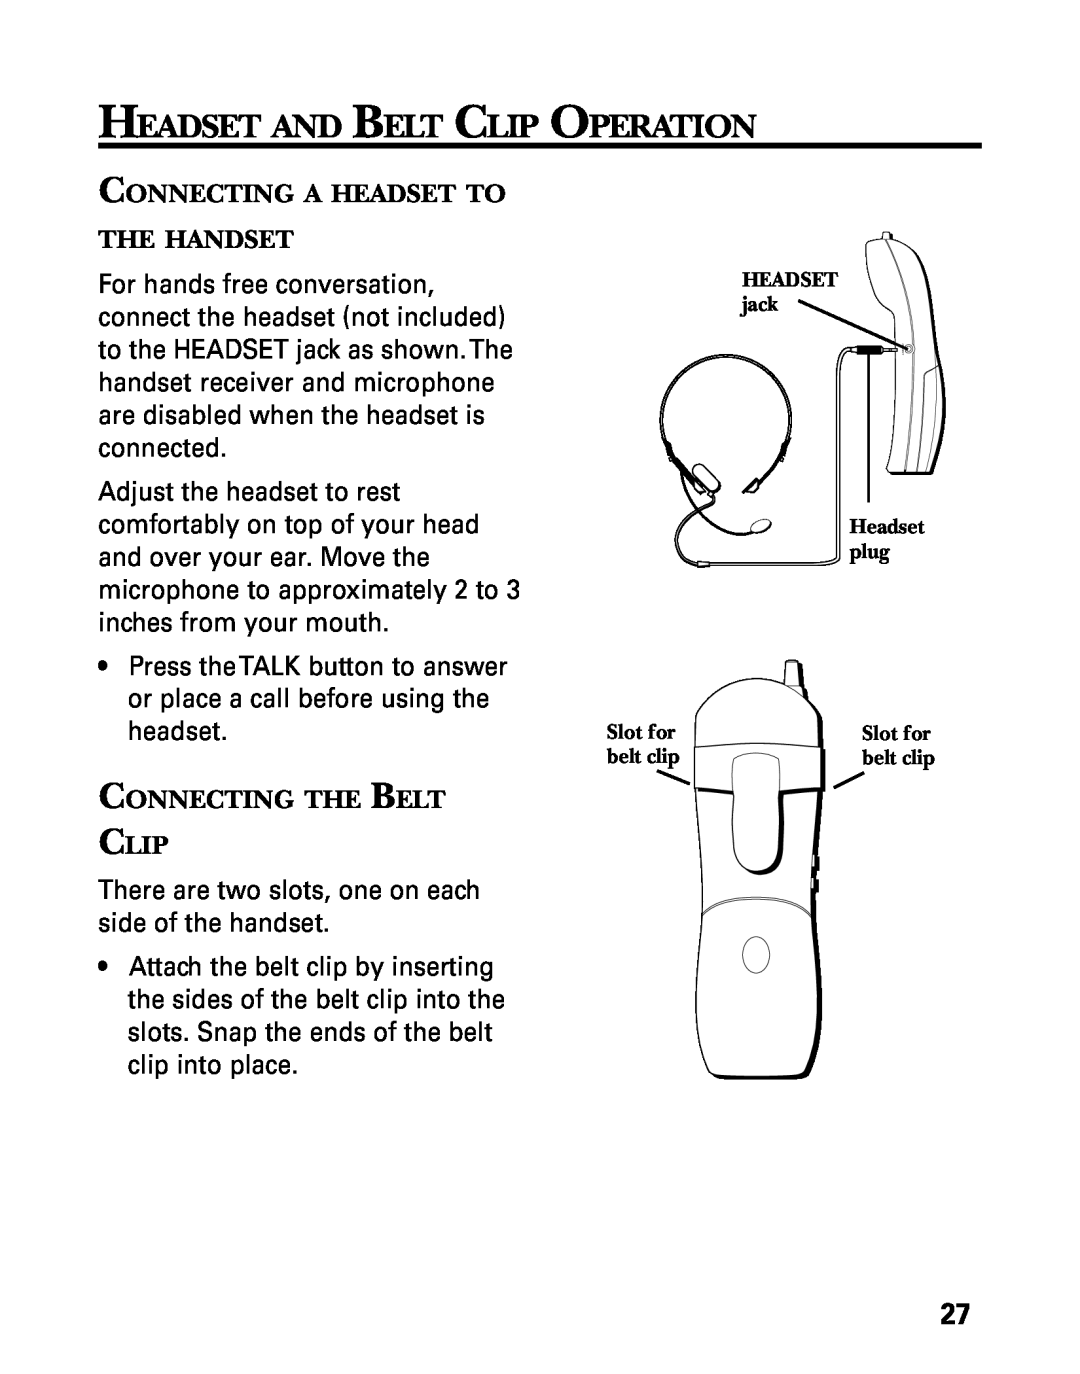 GE 27730 manual Headset And Belt Clip Operation, Connecting A Headset To The Handset, Connecting The Belt Clip 